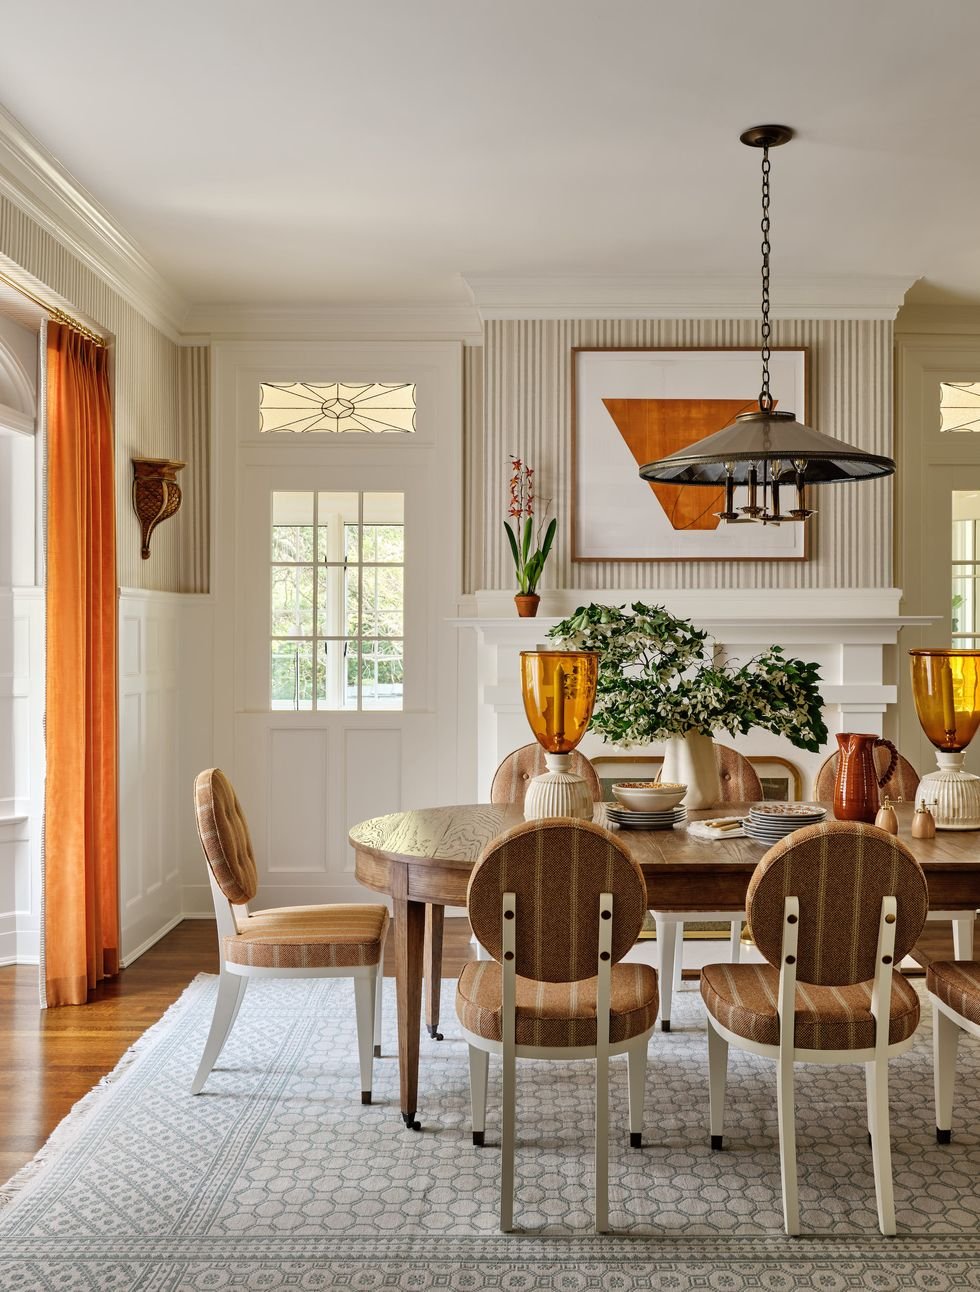 larchmont-by-chaunceyboothby-012-dining-room-6552568d5c329.jpg